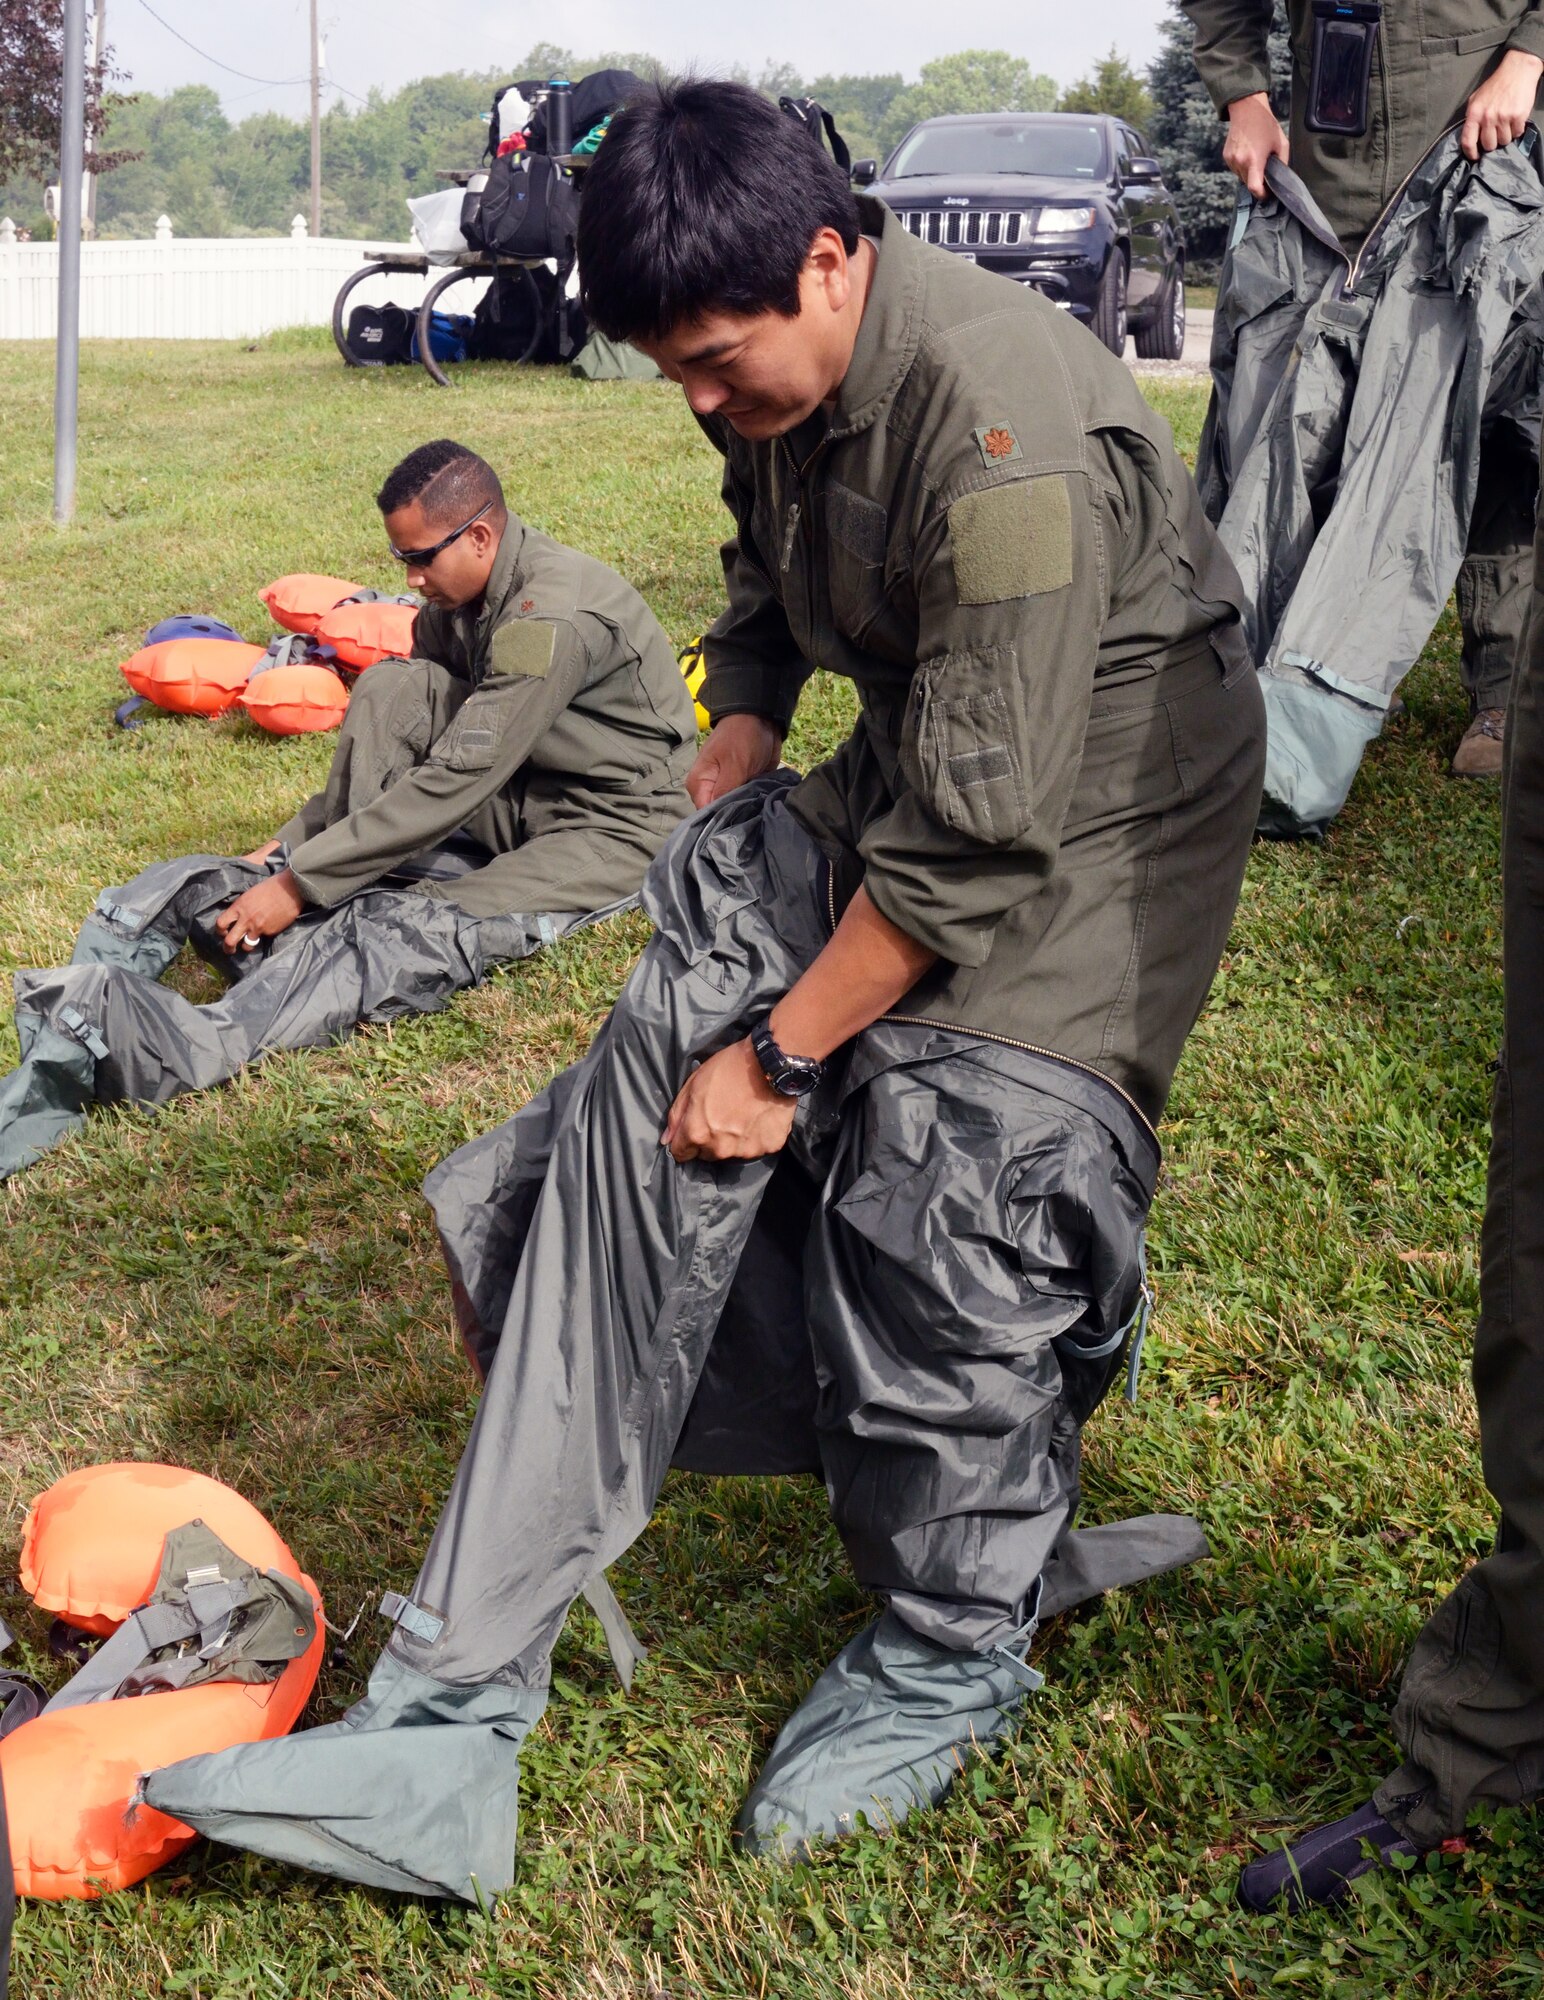 Maj. Chris Lamkey (standing) and Maj. Clay Holland (sitting), 170th Group members assigned to Offutt Air Force Base, Nebraska, don anti-exposure suits while participating in water survival and rescue training July 14, 2018. The suits are worn by aircrew in the eventuality they must be in water where the temperature is below 60 F. The air crew members were briefed on the availability and use of tools contained in their survival gear before putting academics and theory to the test in the waters of a local lake.